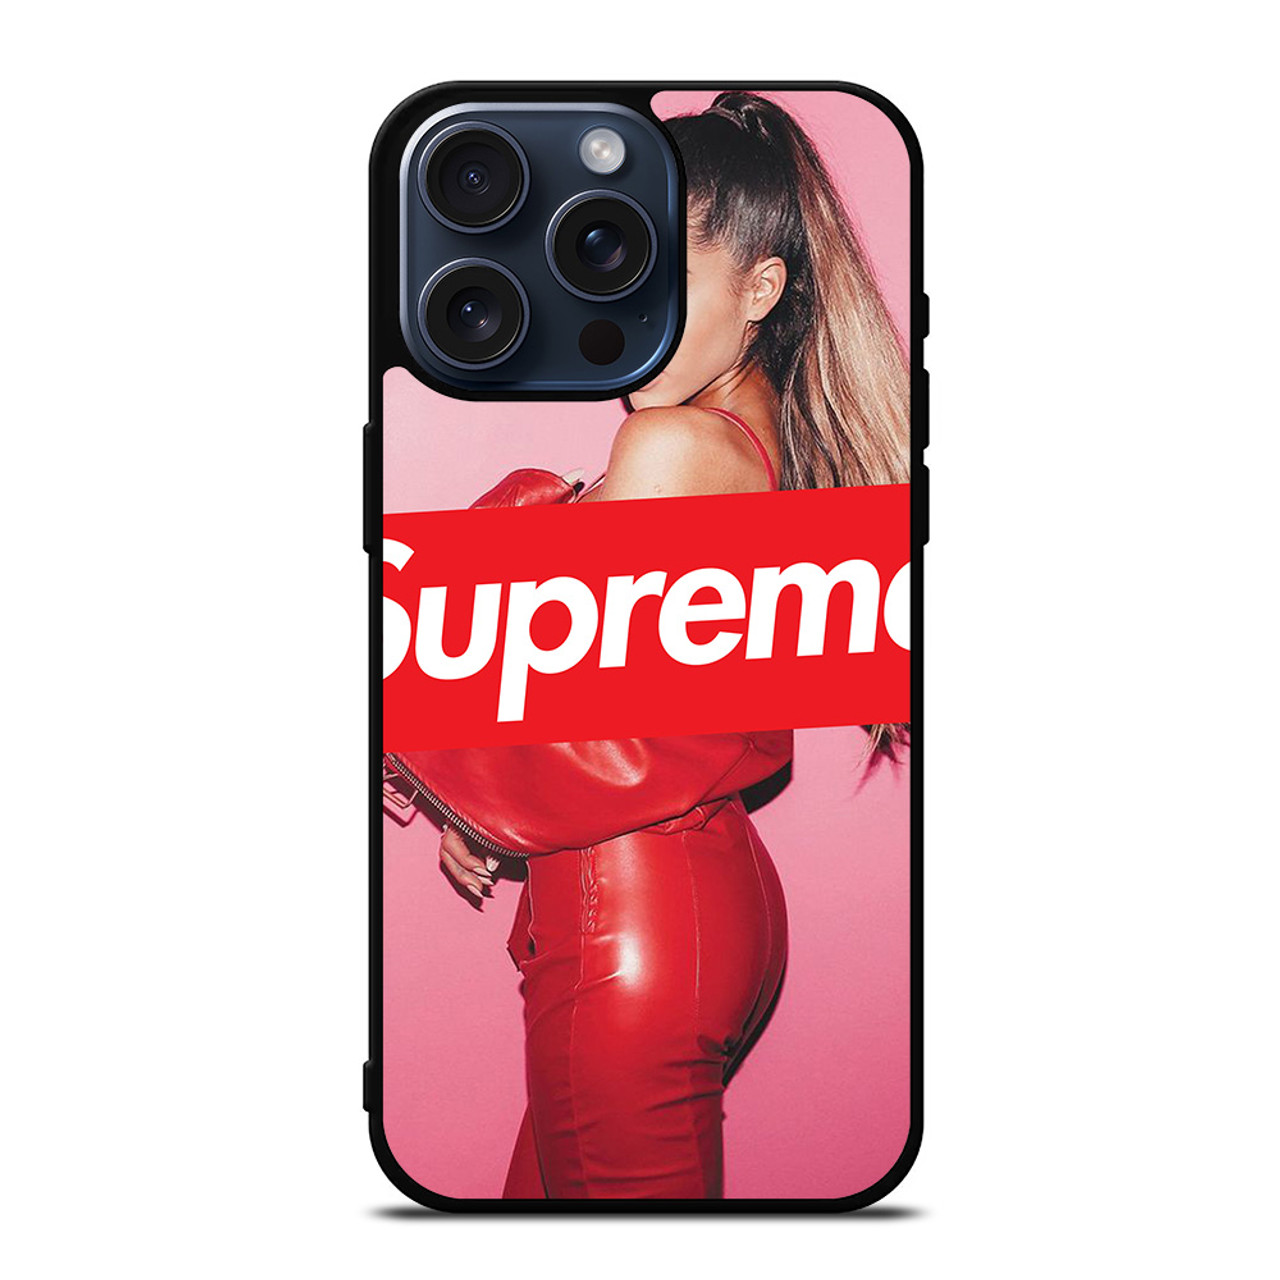 Supreme Red Cell Phone Cases